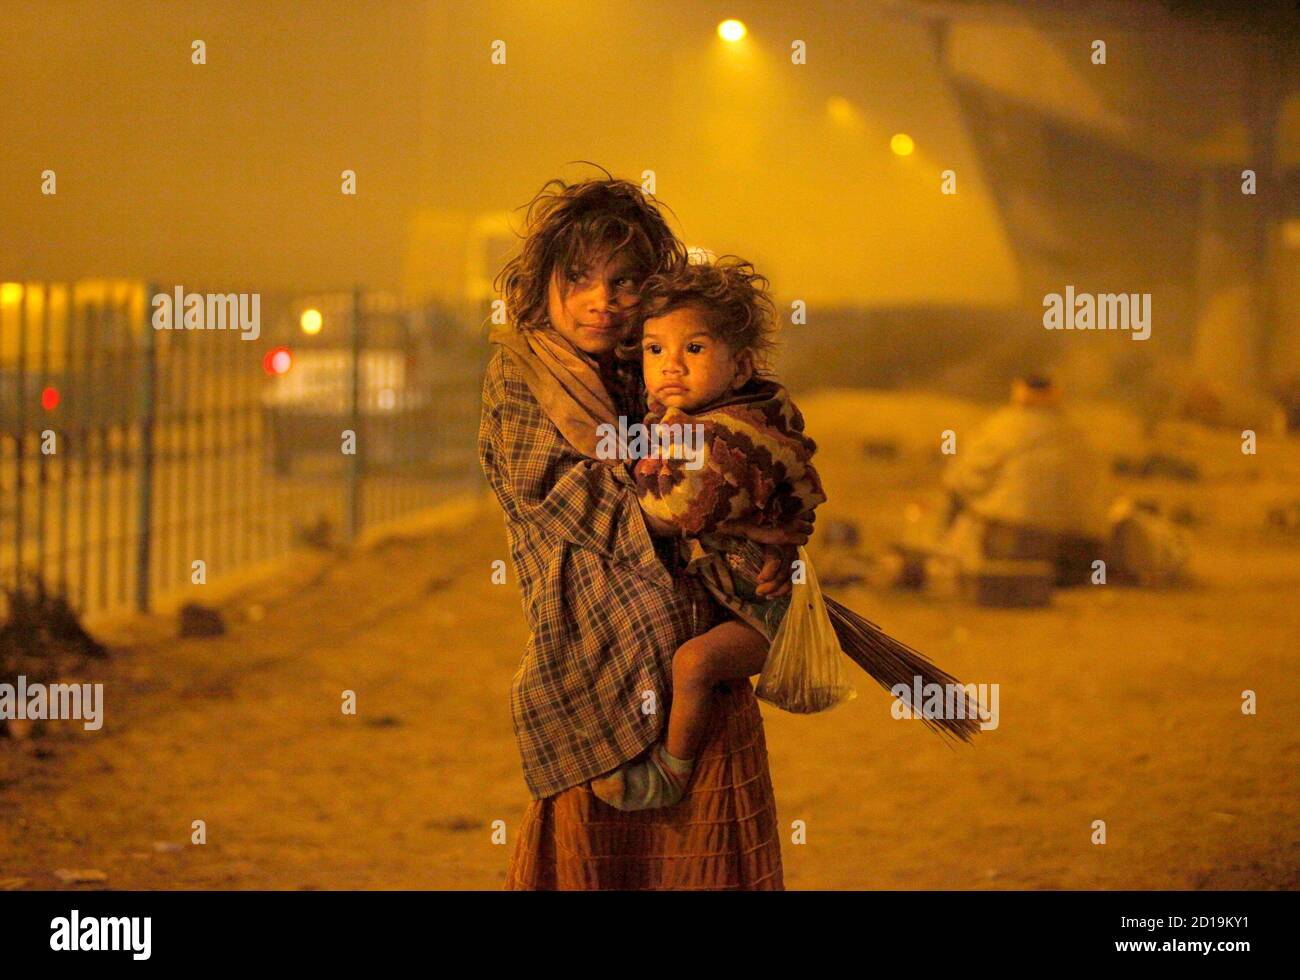 Homeless children arrive to sleep under a flyover in New Delhi January 21, 2010. The Supreme Court chided the Delhi government to provide night shelters with blankets, water and mobile toilets to all homeless in the capital, local media reported. REUTERS/Reinhard Krause (INDIA - Tags: SOCIETY) Stock Photo